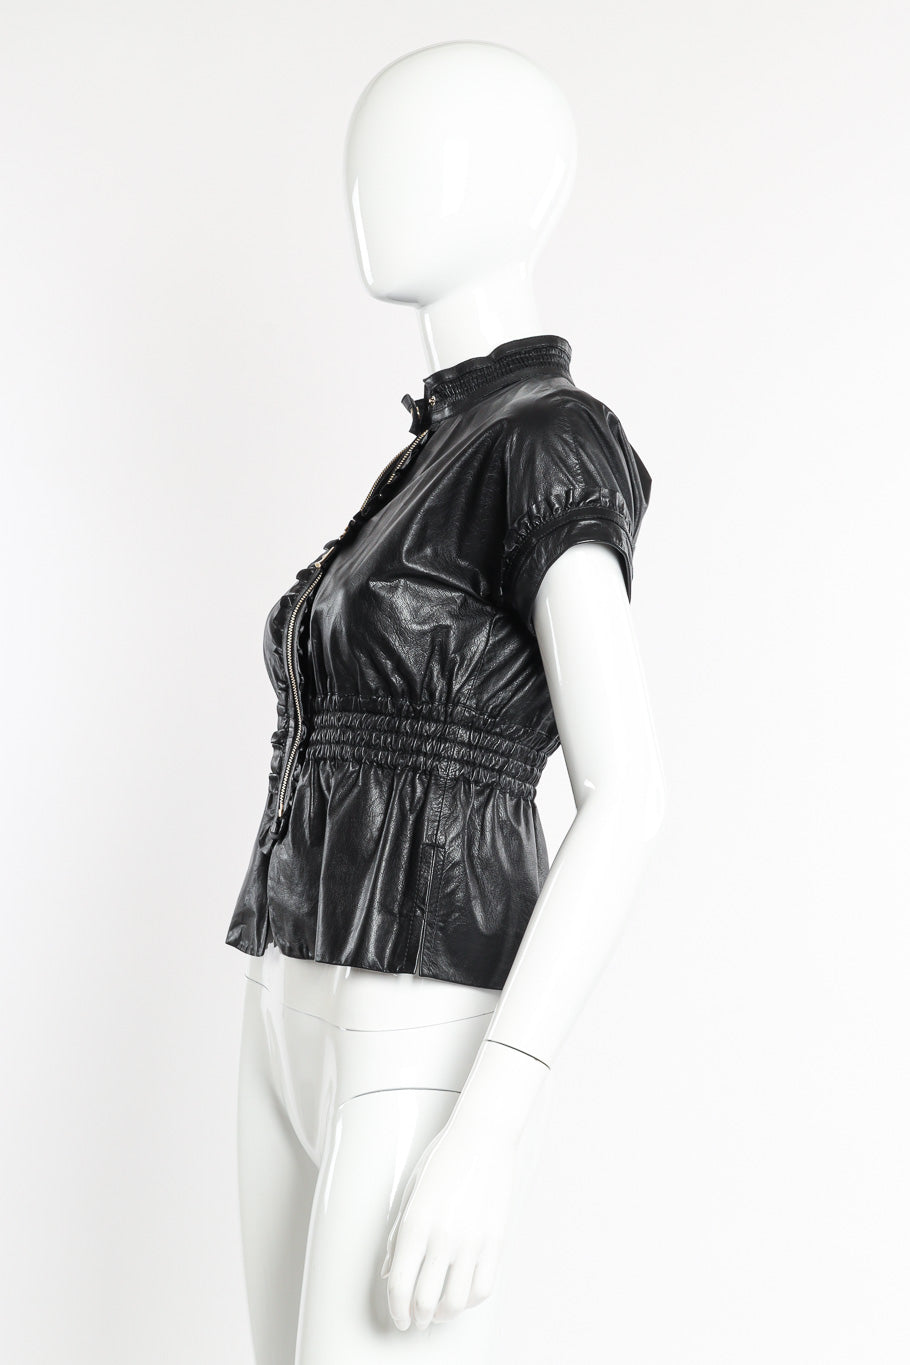 Gucci Leather Ruffle Top side view on mannequin @Recessla